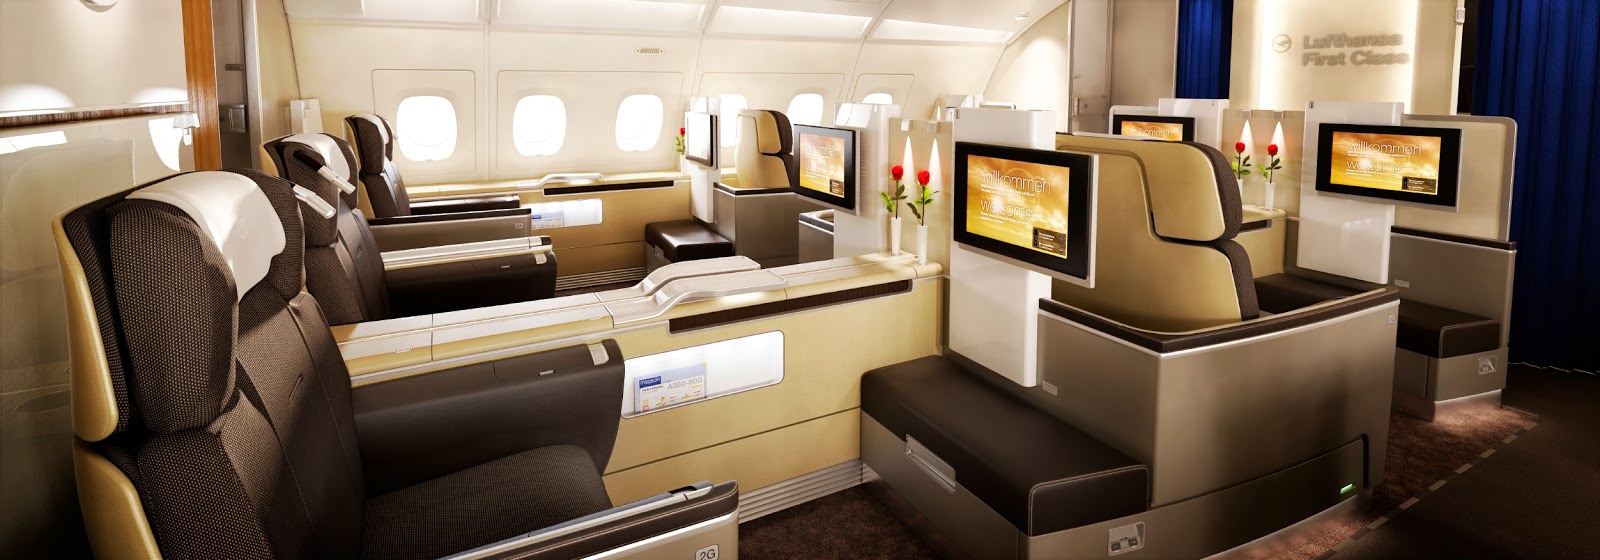 Airplanes Technology Airbus A380 Interior Business Class